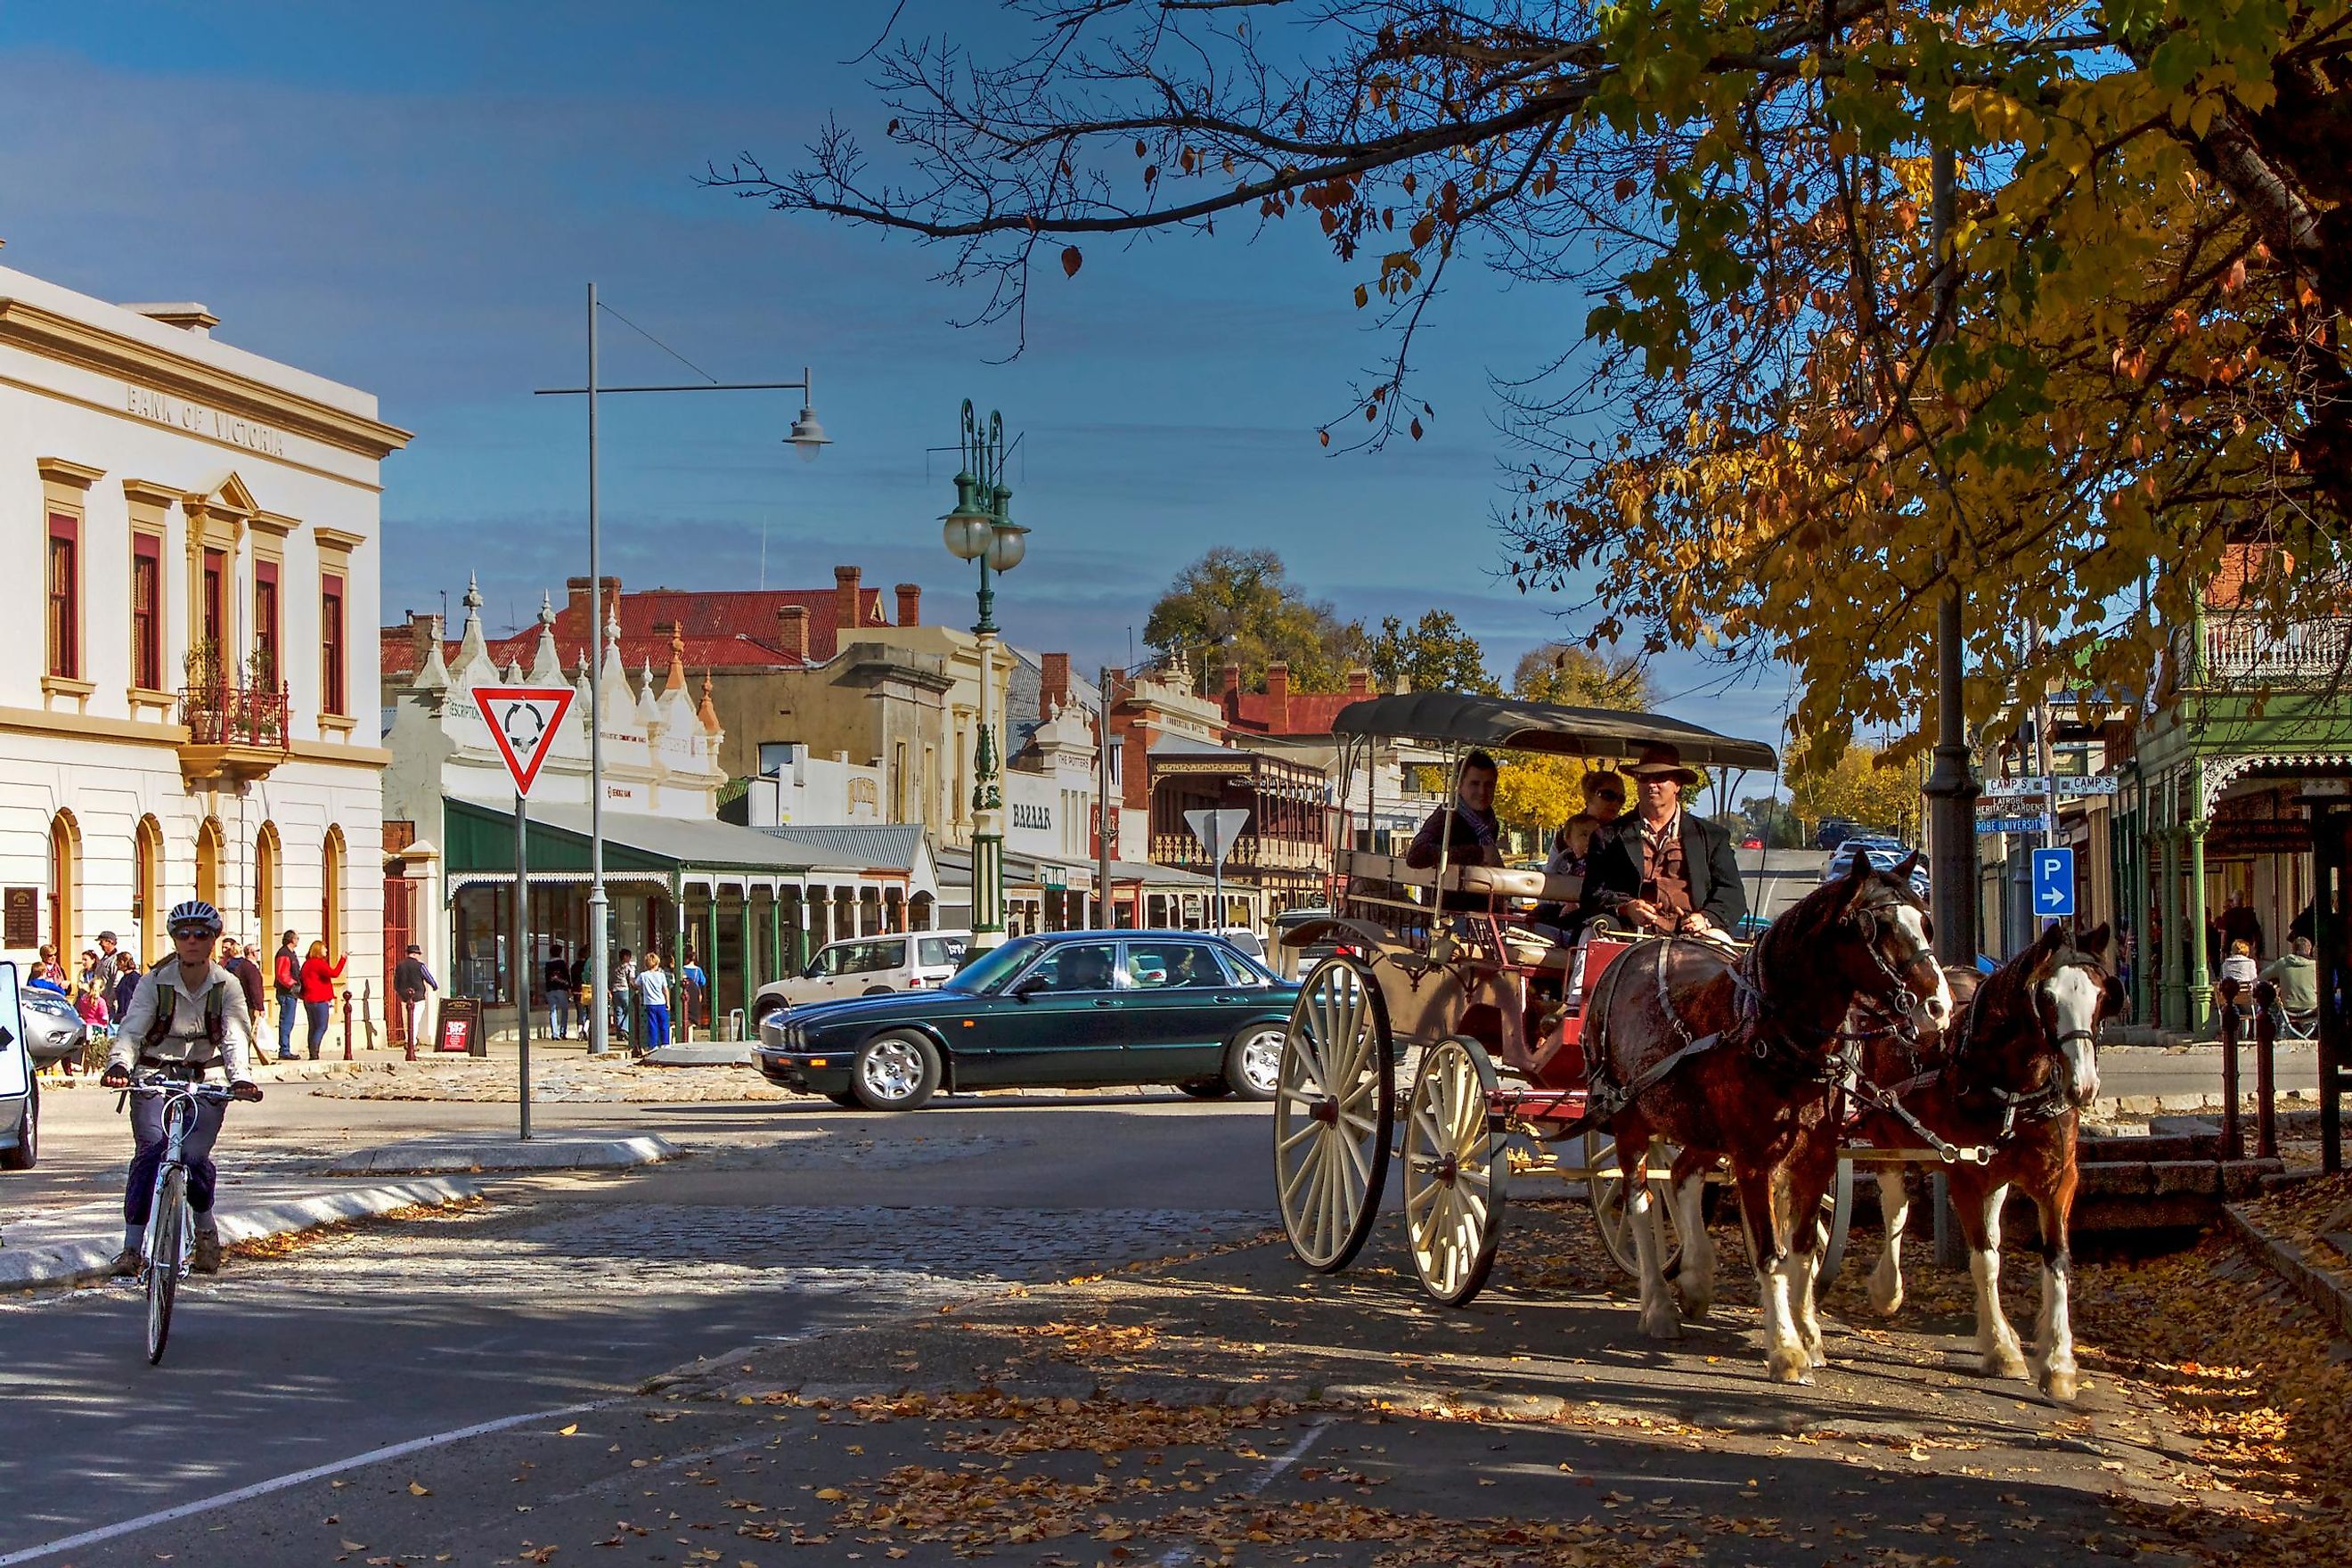 A busy morning in the tourist mecca of historic Beechworth in North West Victoria, Australia.